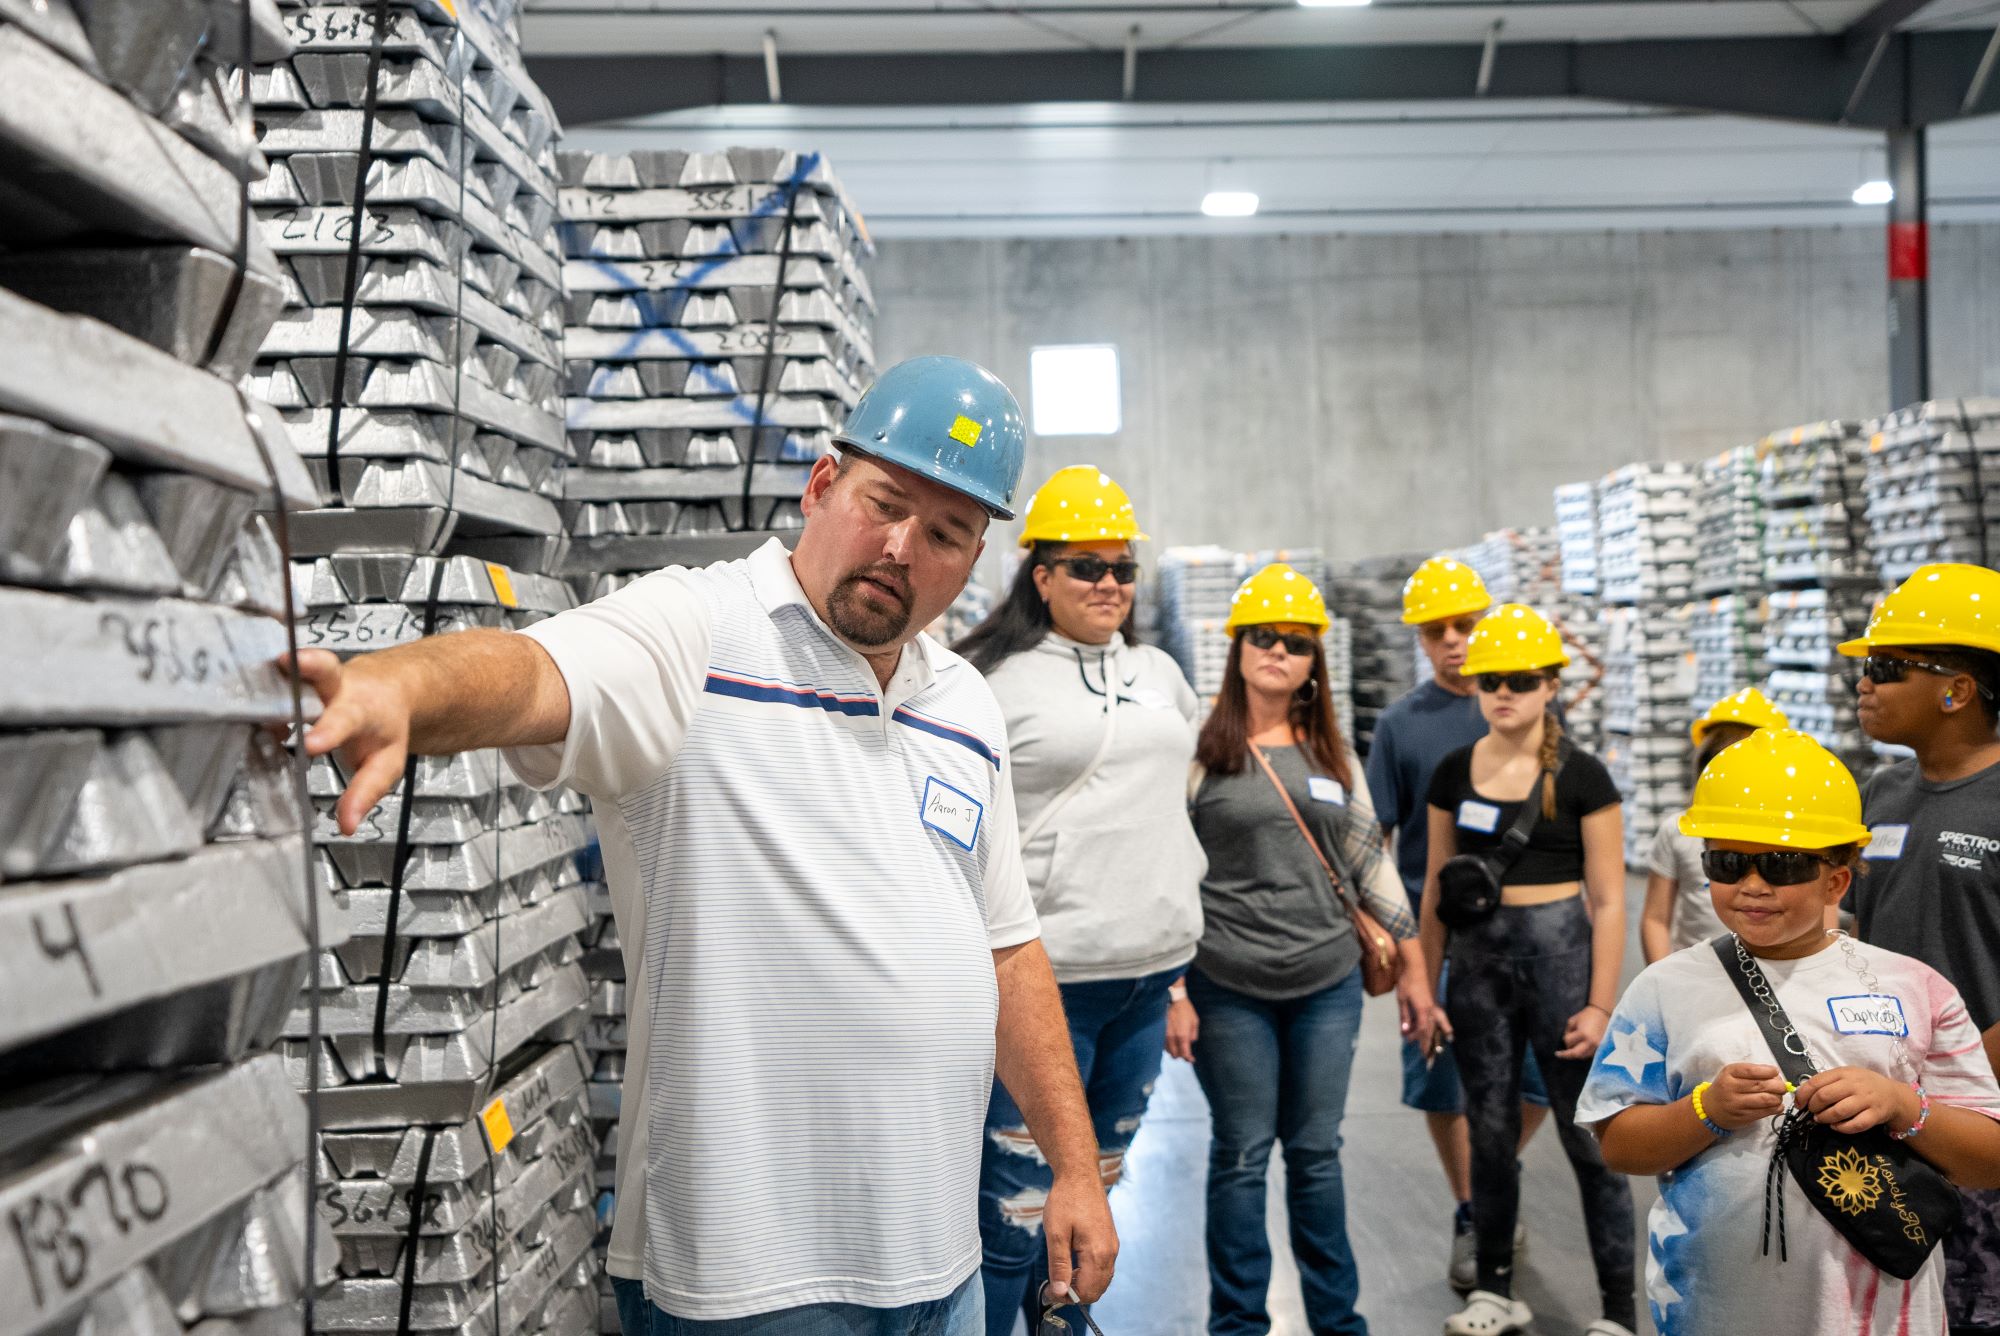 A man in a hardhat shows metal ingots to a group of people.